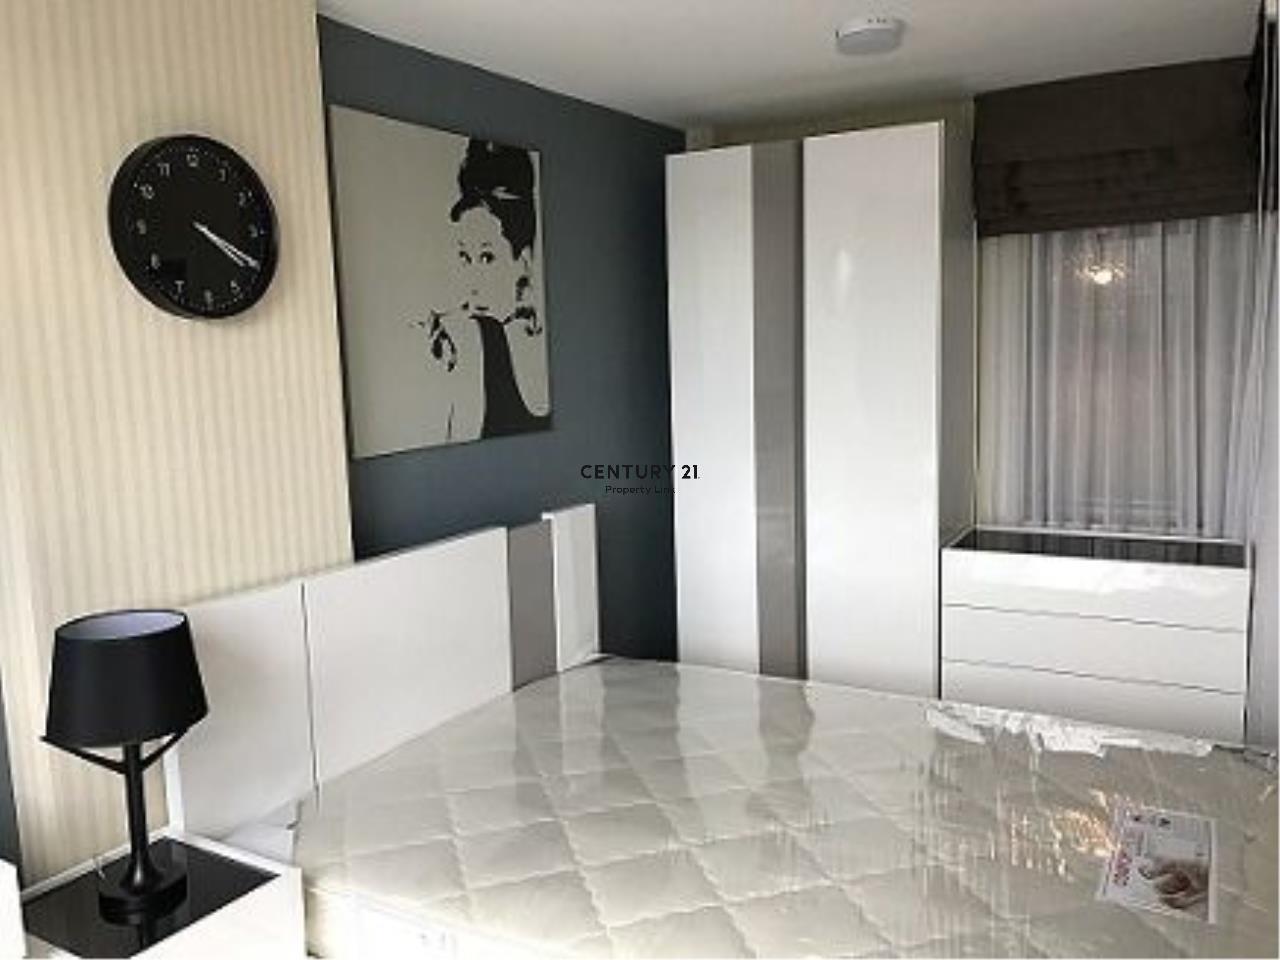 Century21 Property Link Agency's 39-CC-61449 Chateau In Town Sukhumvit 62/1 Room For Sale 1 Bedroom Sukhumvit Road Nearby Bang Chak BTS Sale price 3.65 MB.   3